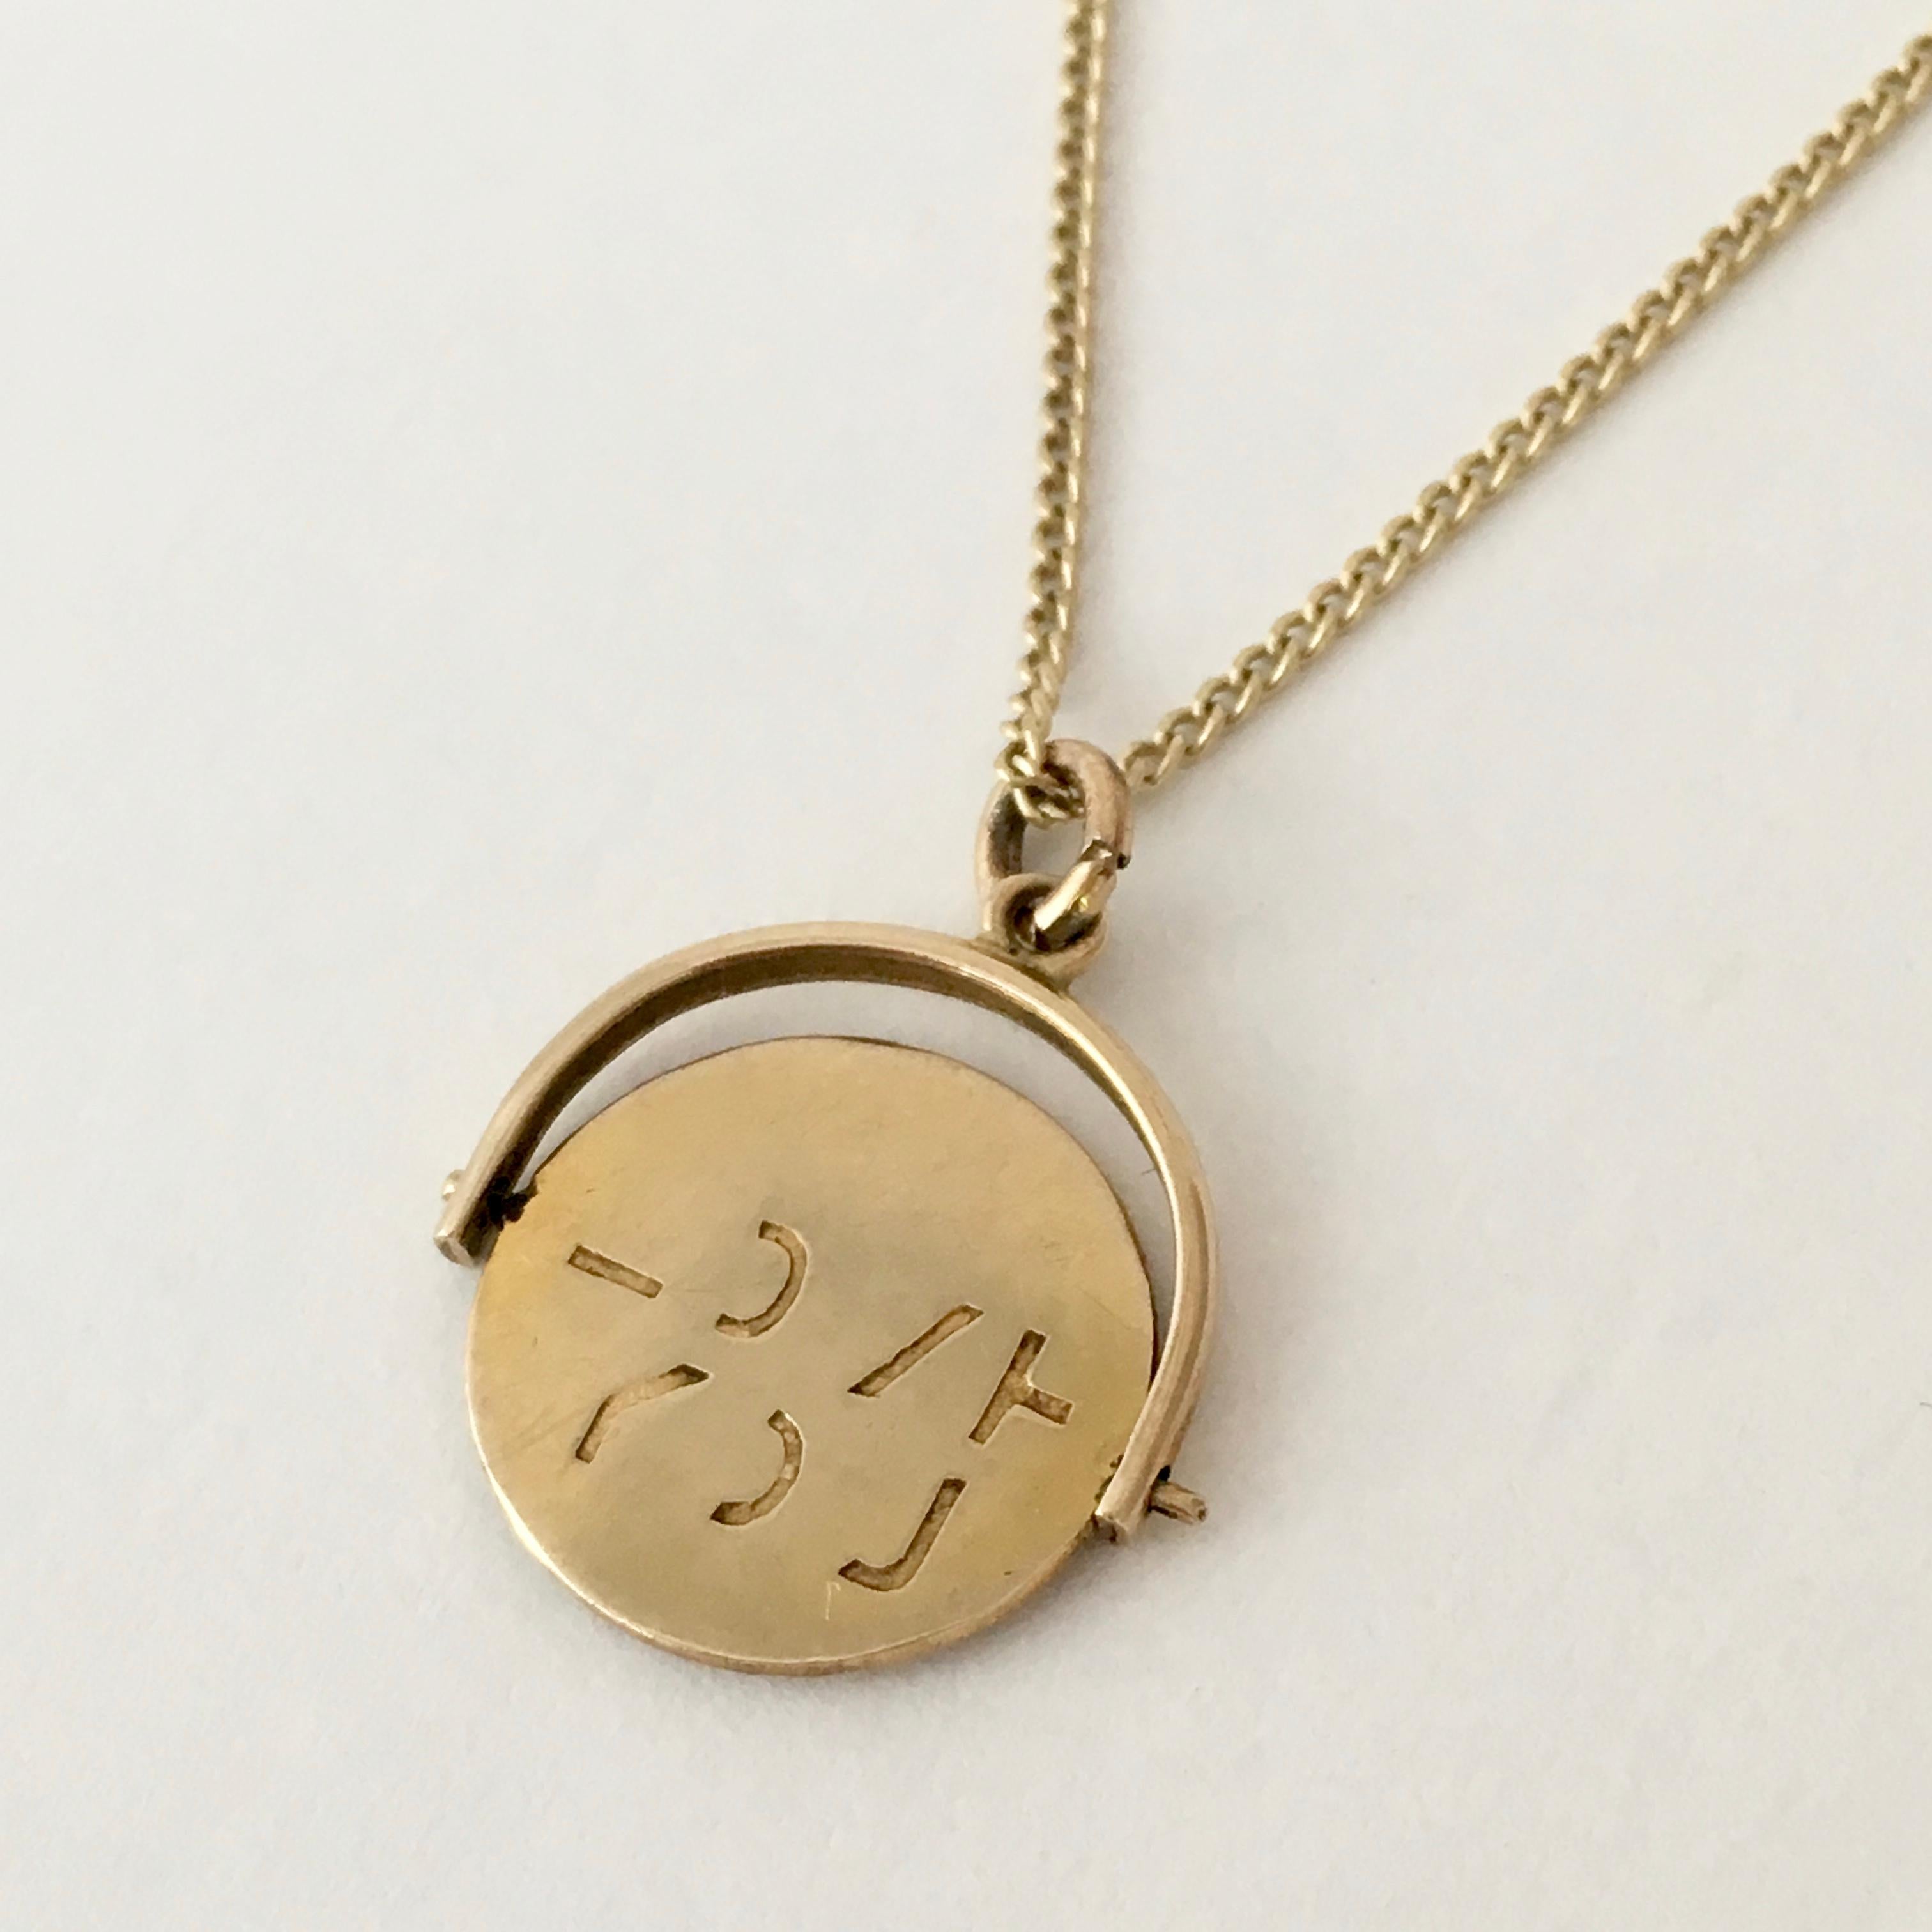 Contemporary Vintage Jewelry Gold Charm 'I Iove You' Coin Spinner Pendant Love Token